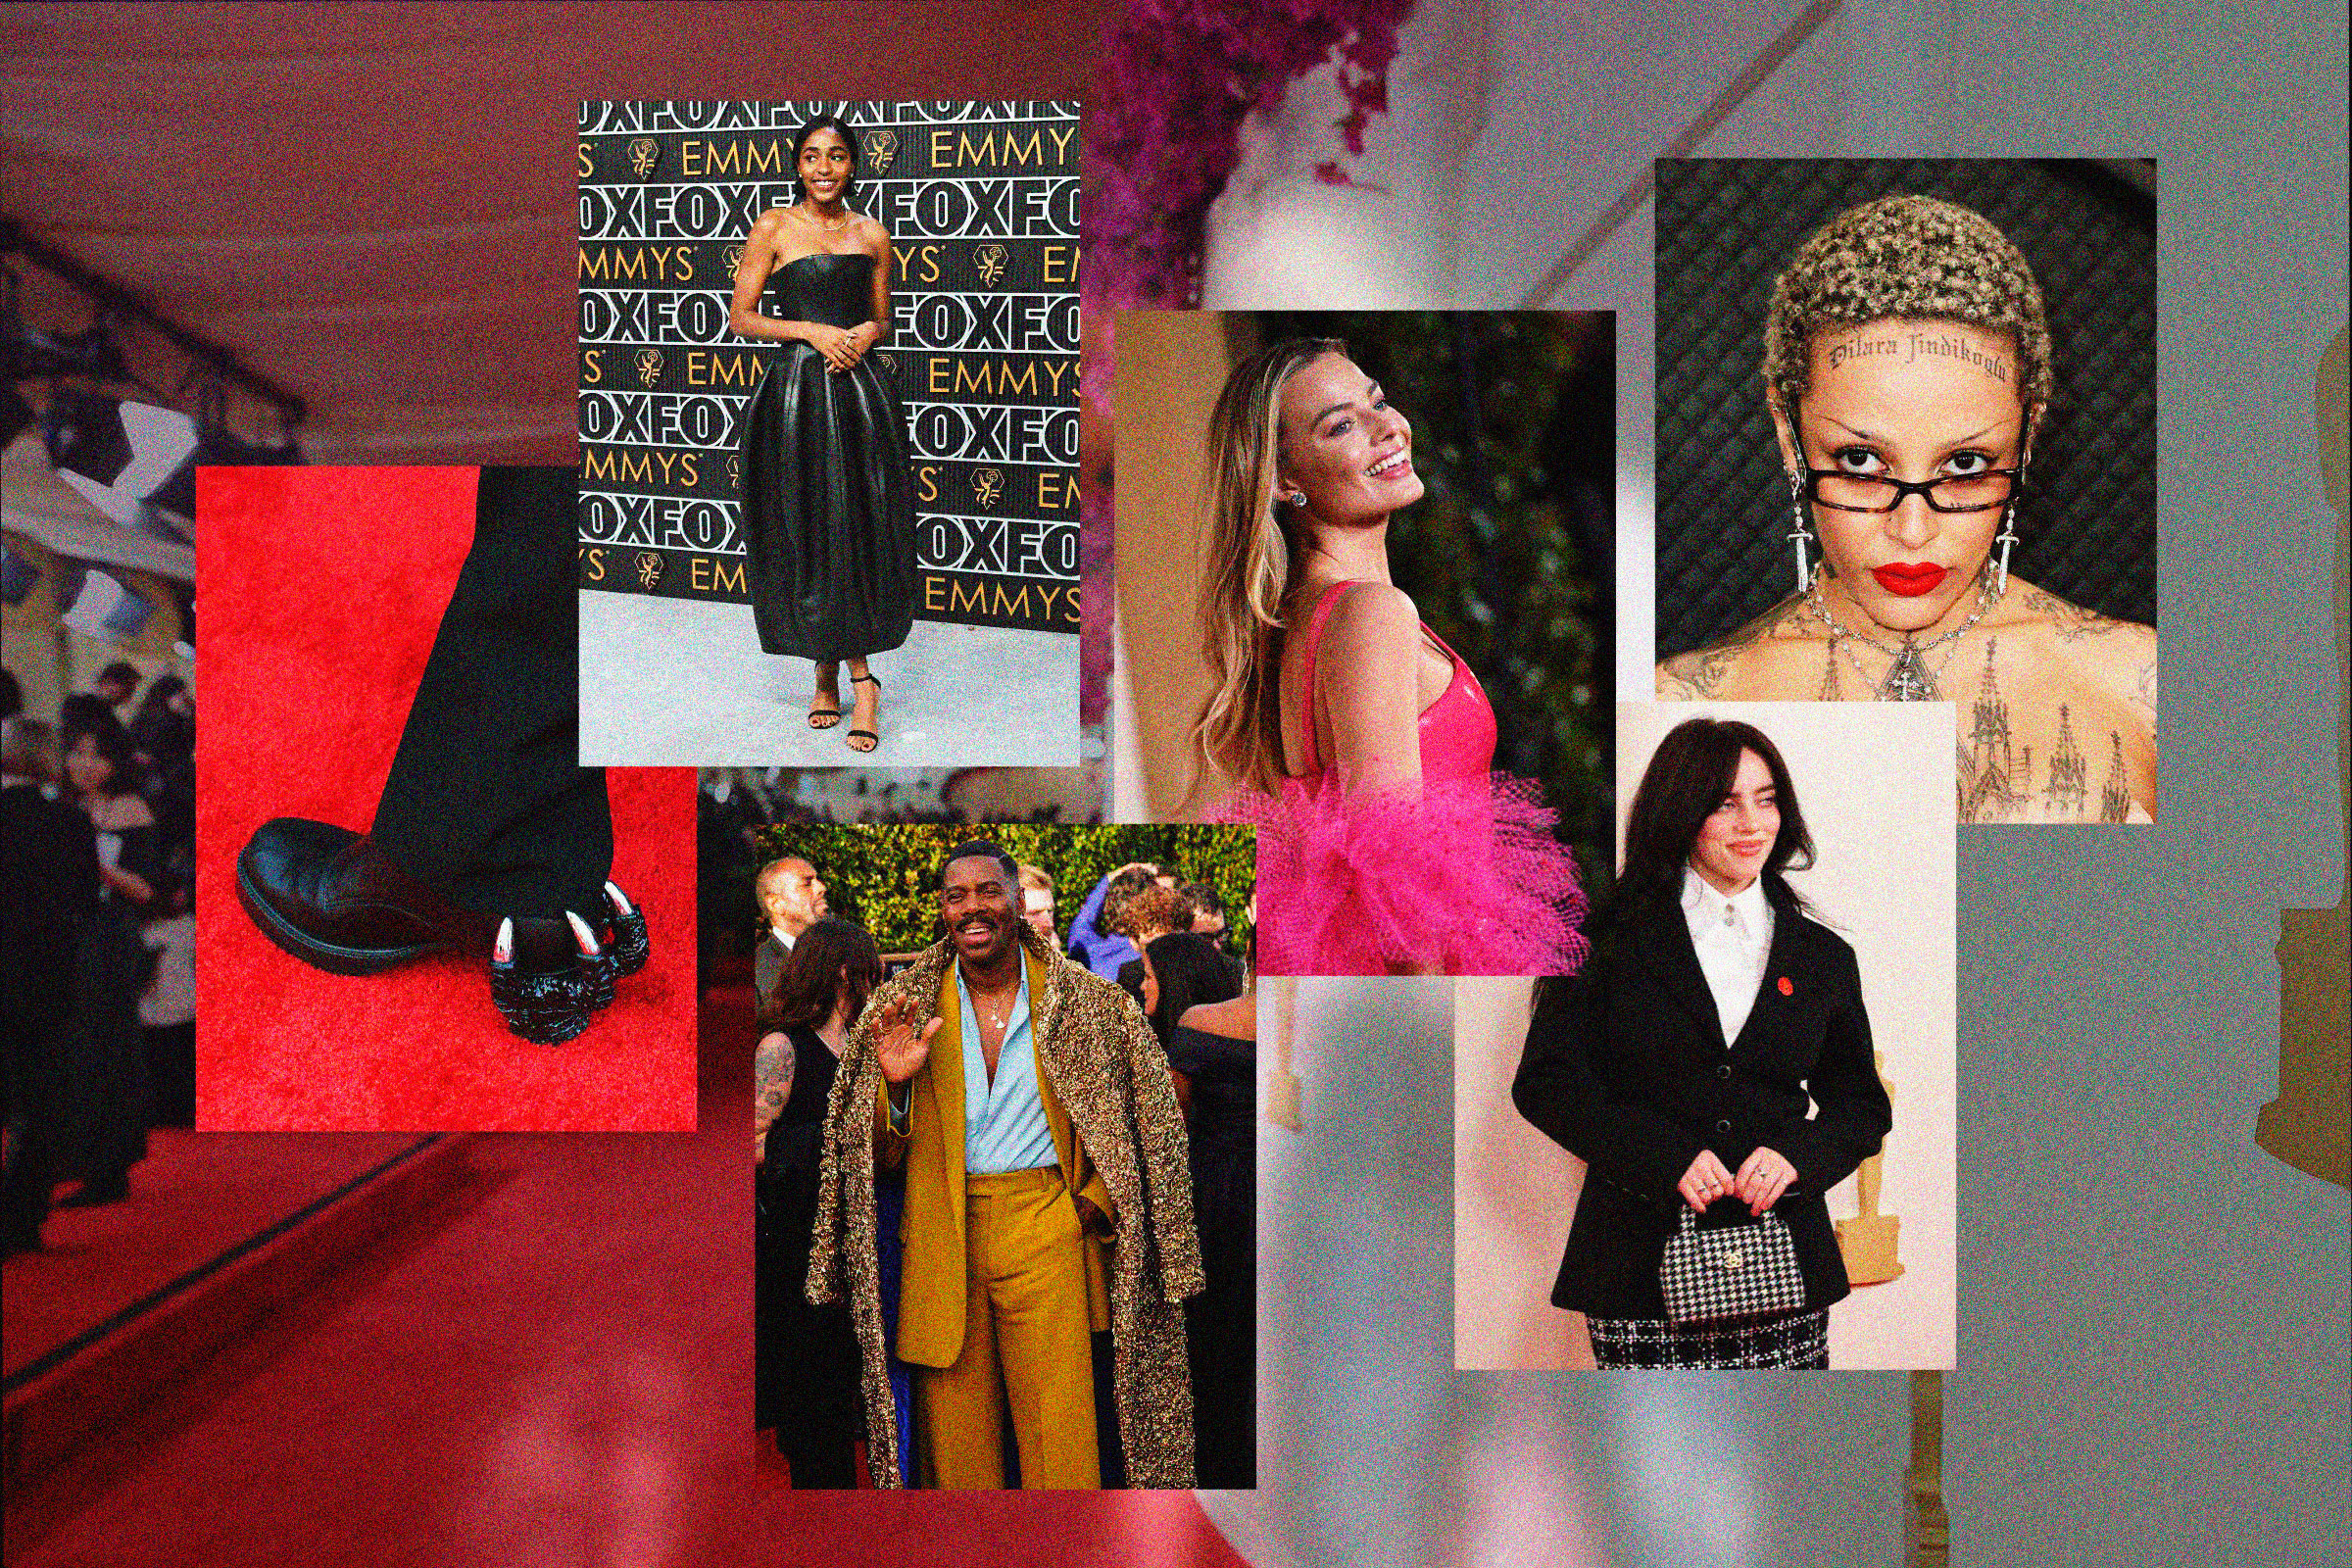 A collage of images of different celebrities dressed up for different awards shows